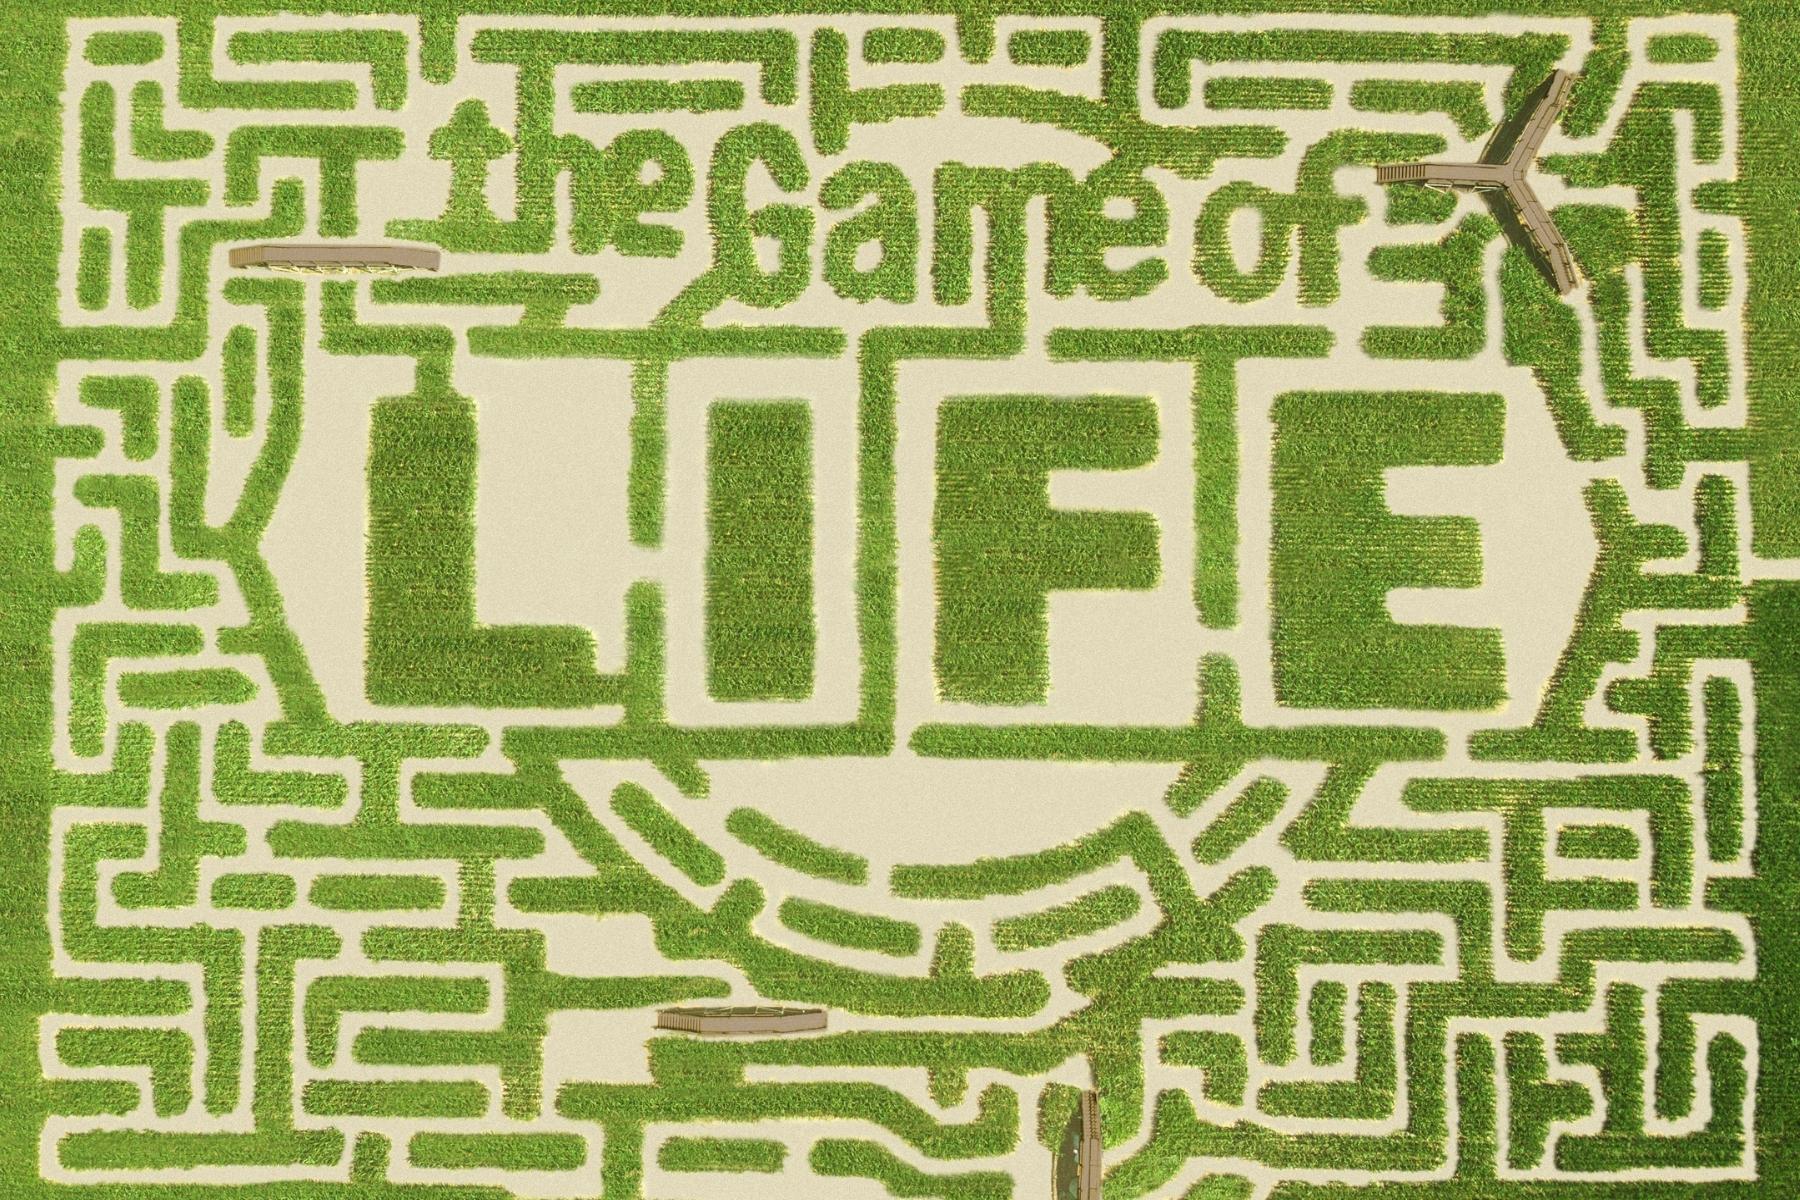 The Grand Opening of “The Game of Life” at Davis Mega Maze • Visit